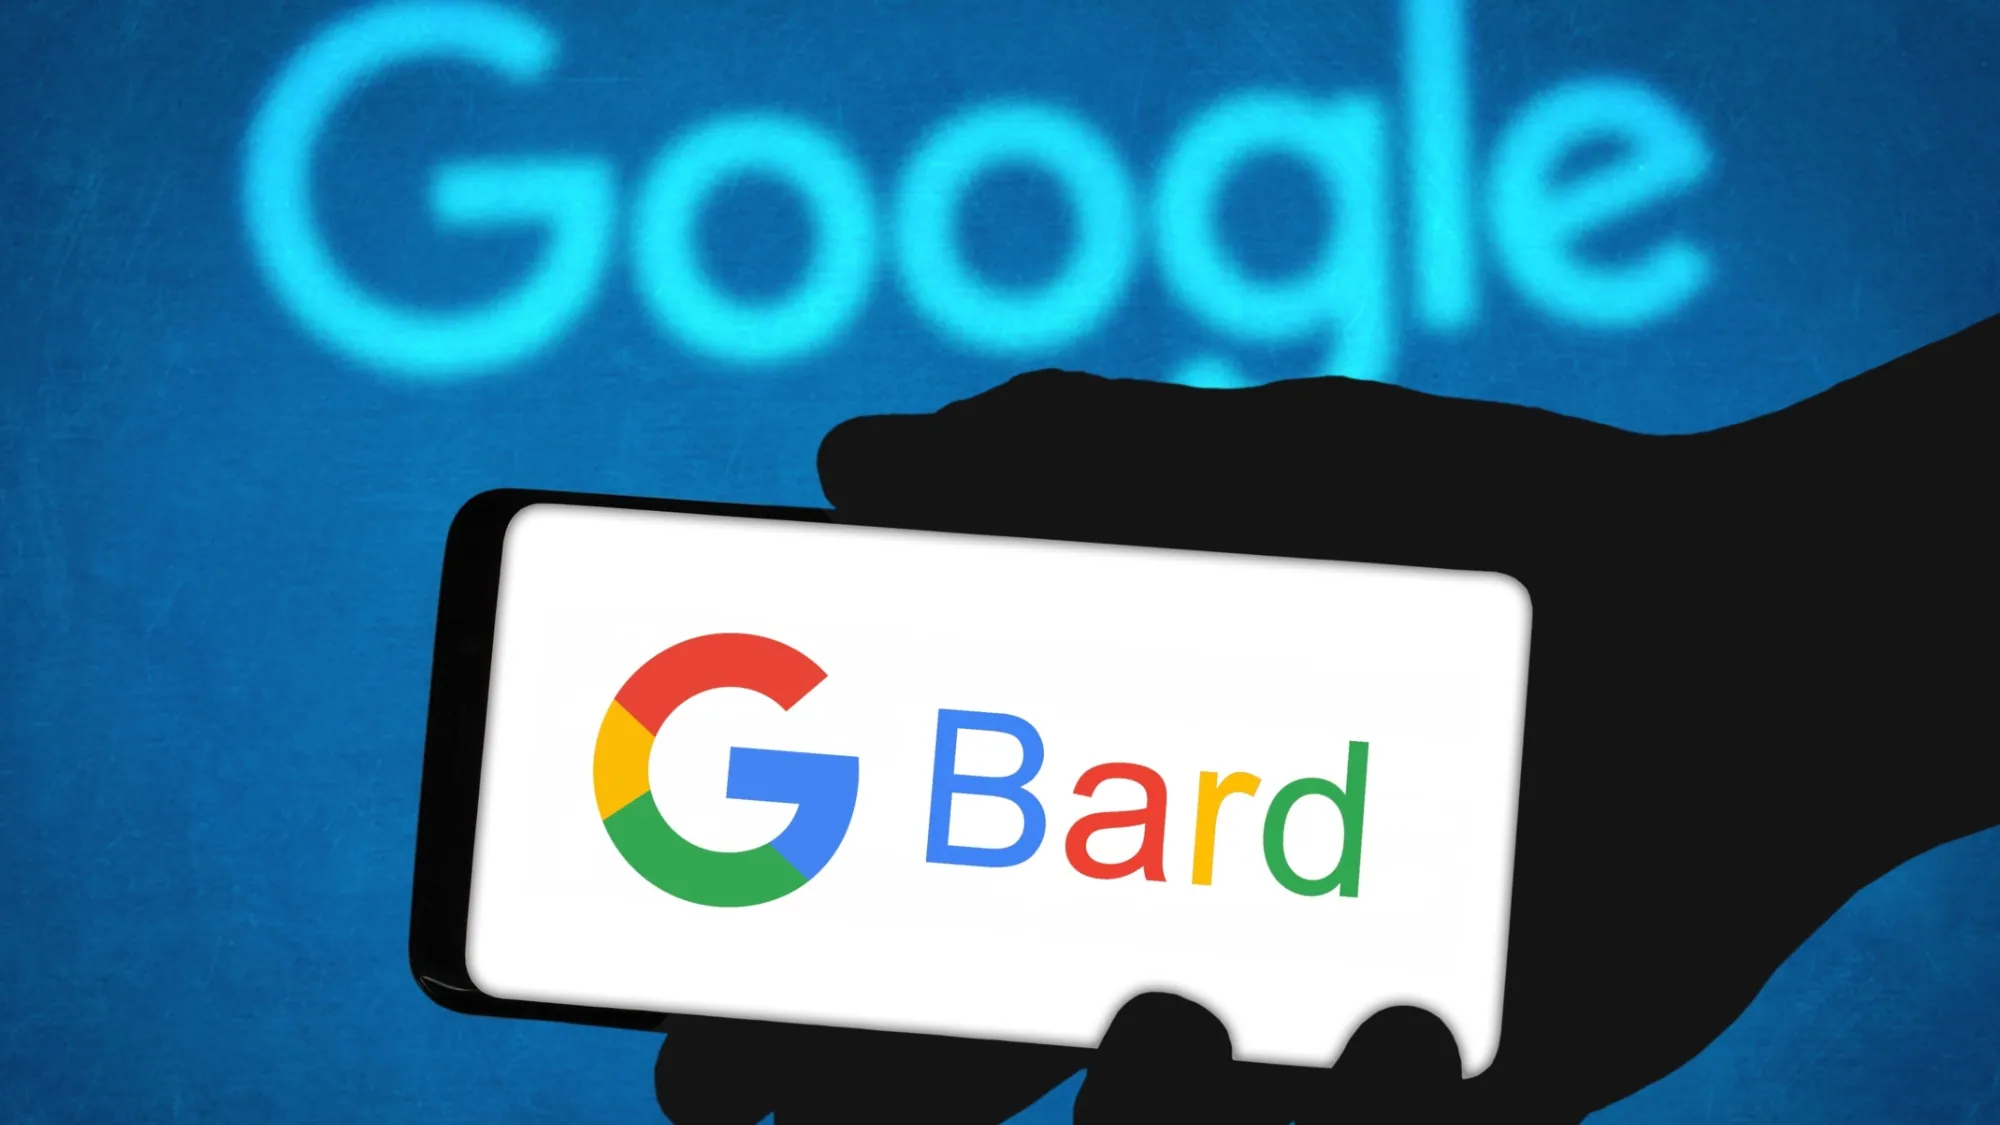 How To Fix Google Bard “Request Timeout Error”